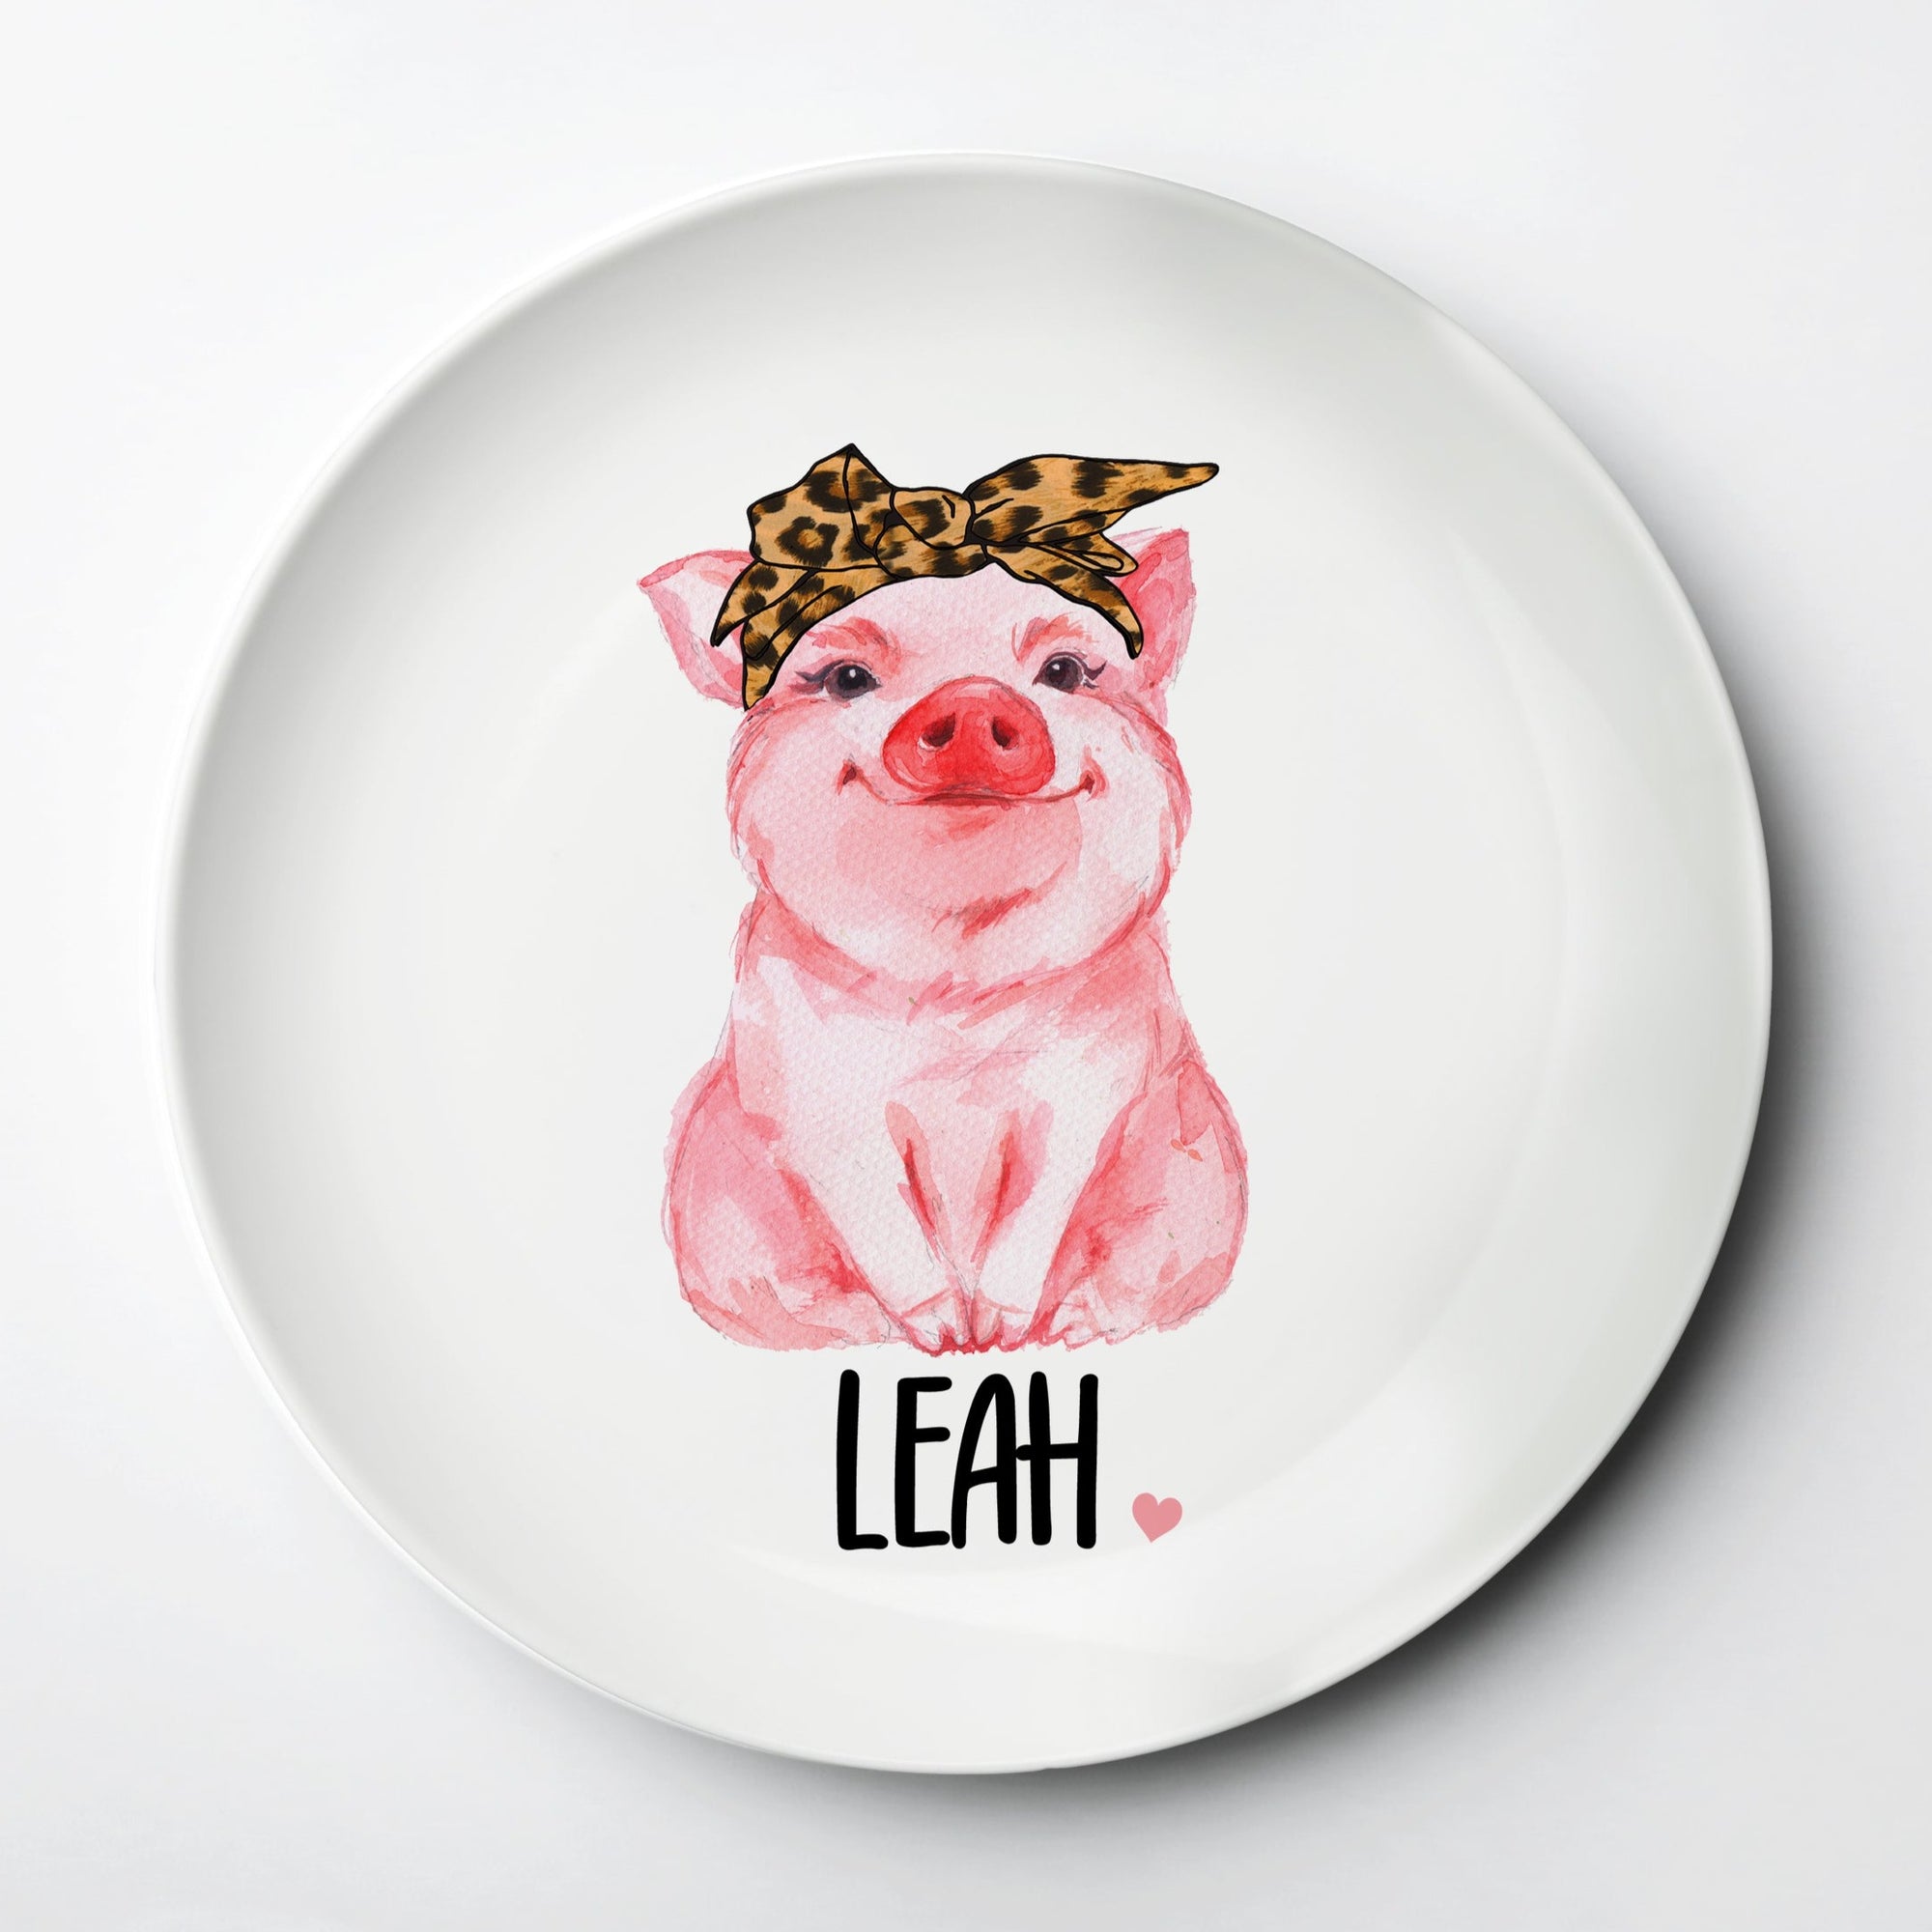 Personalized Pig plate, ThermoSāf® kids reusable plate, microwave, dishwasher and oven safe.  Made in the USA, Pipsy.com